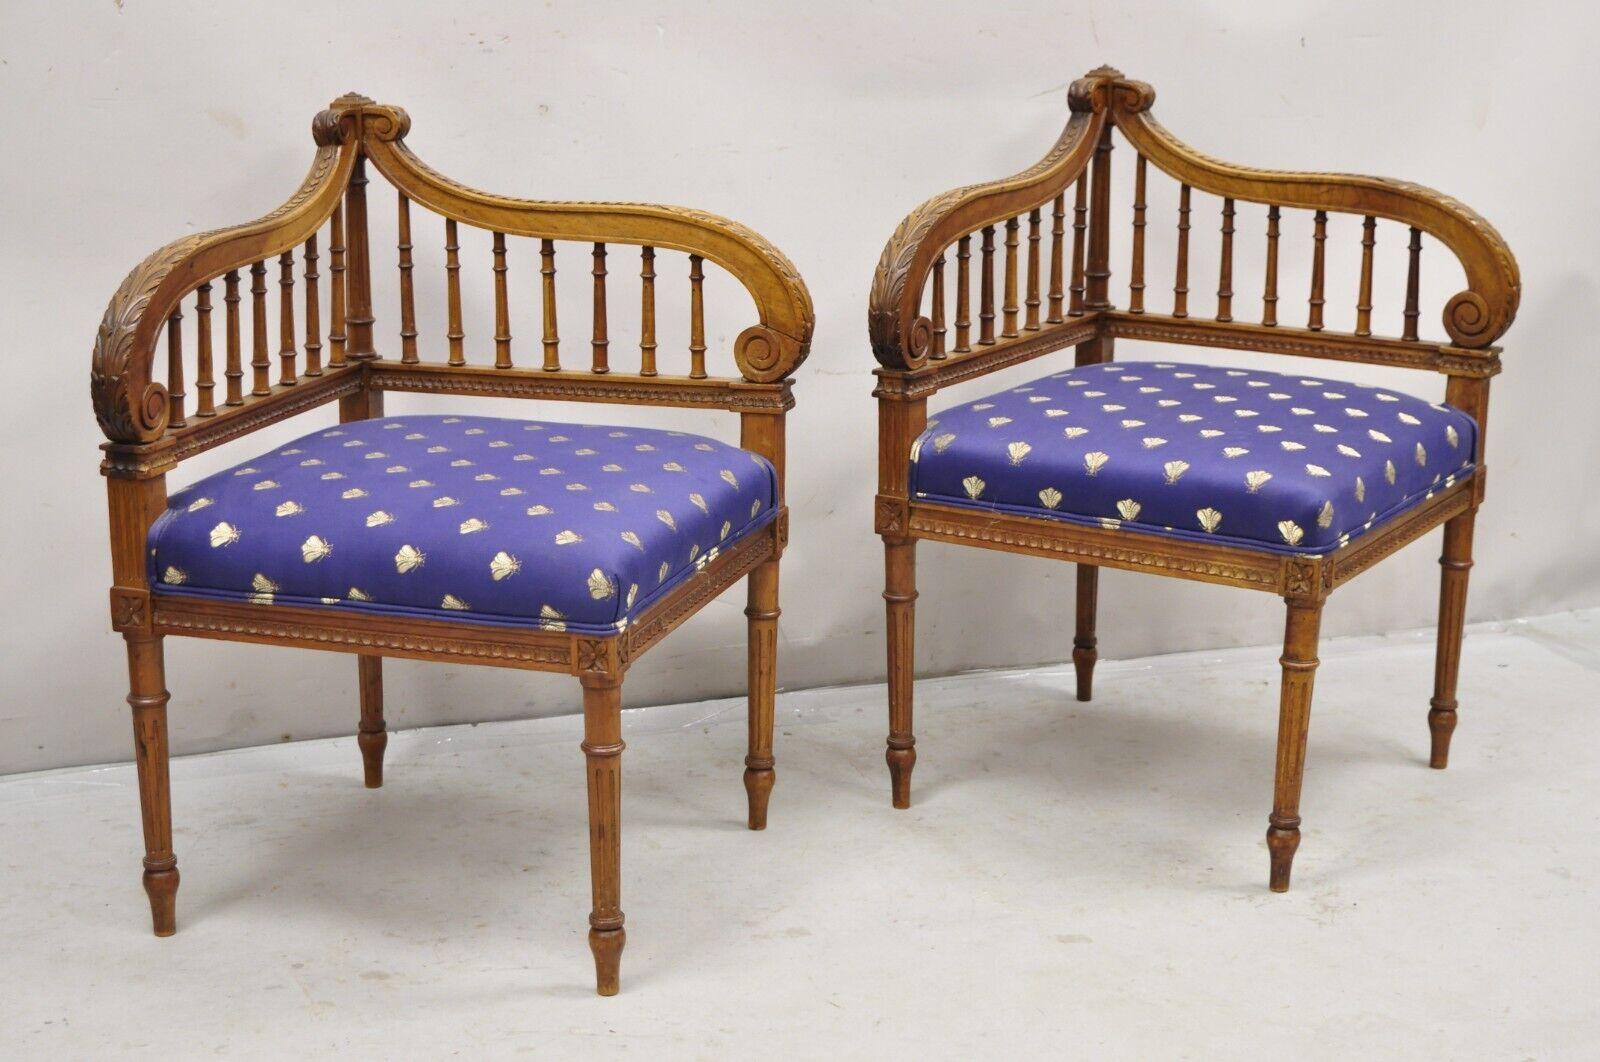 Antique French Louis XVI Style Carved Walnut Lyre Harp Corner Chairs - a Pair. Blue upholstered seats with 